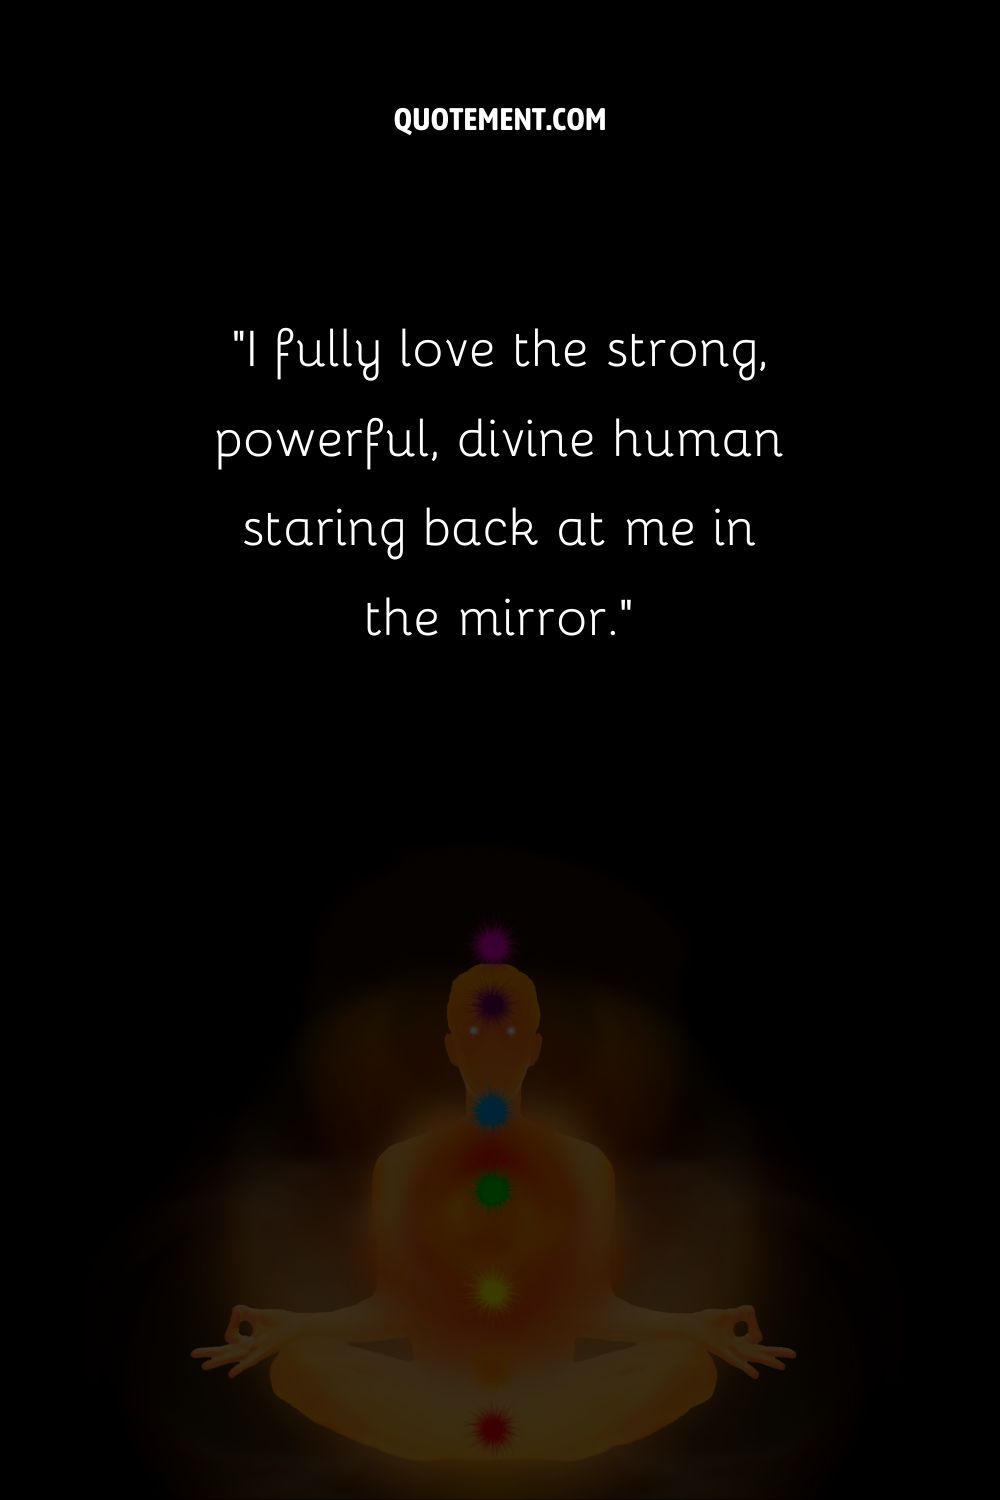 I fully love the strong, powerful, divine human staring back at me in the mirror.